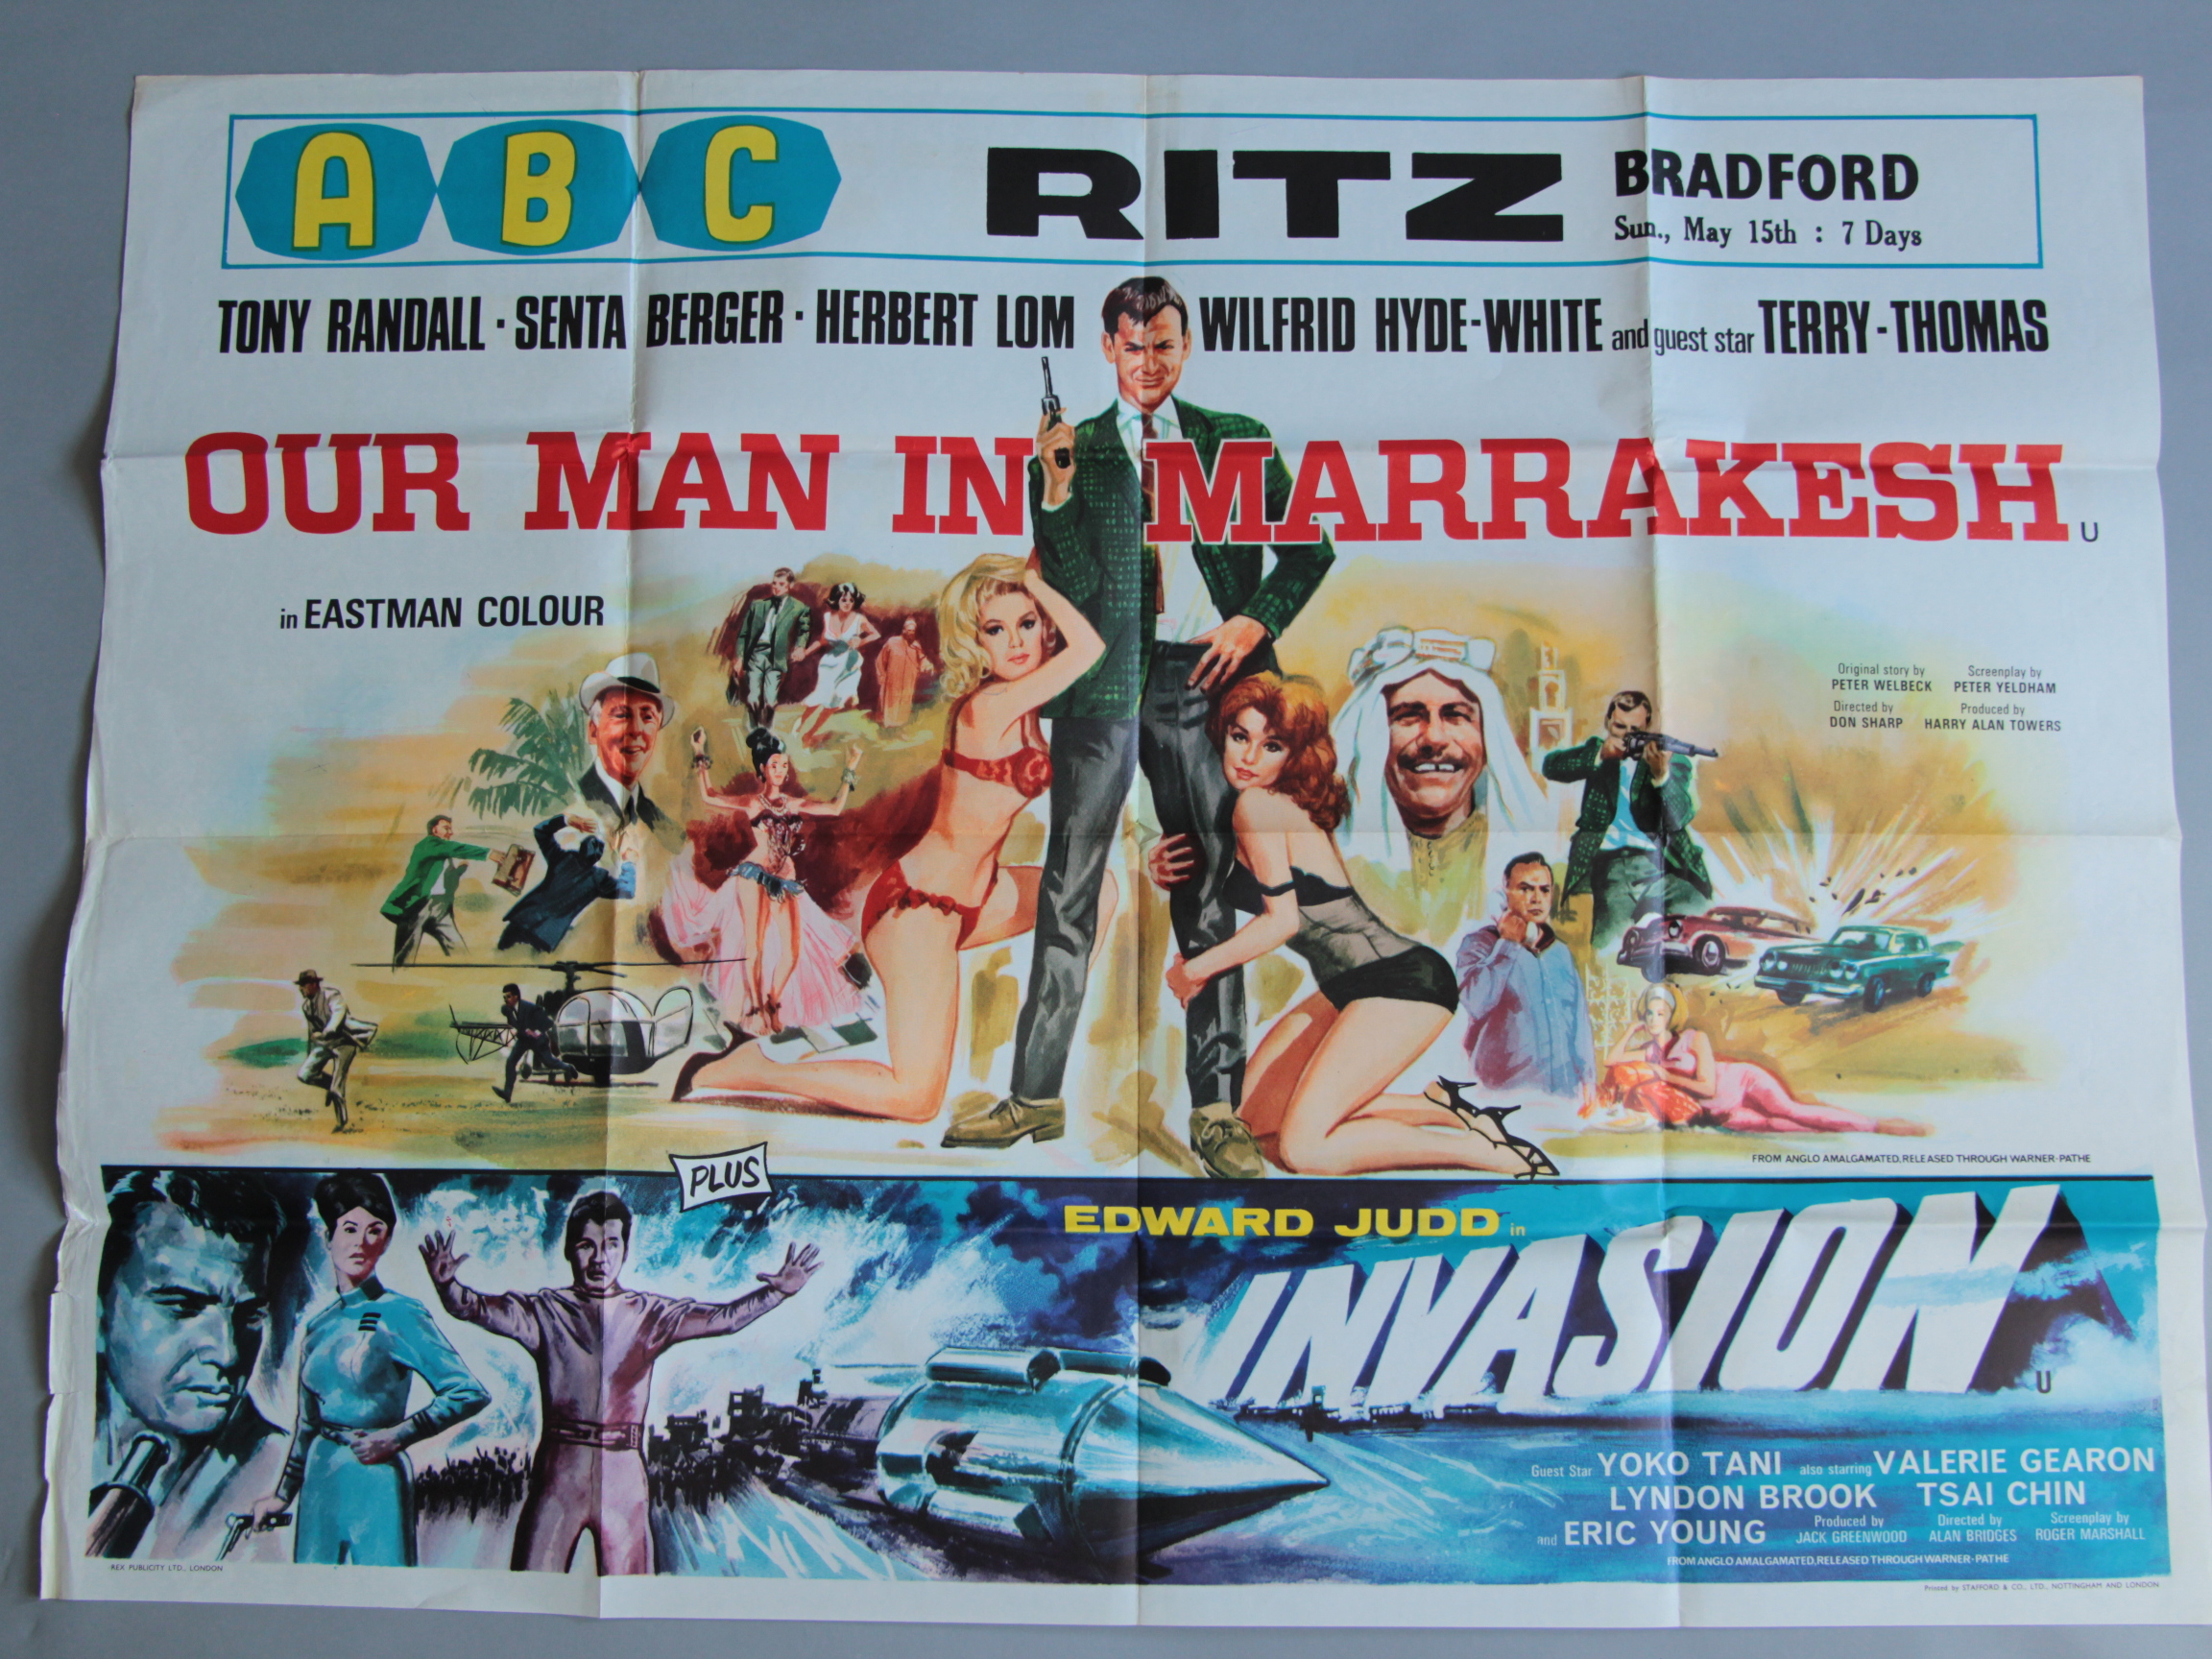 Collection of Spy themed British Quad Film Posters each measuring 30 x 40" including: The Glass